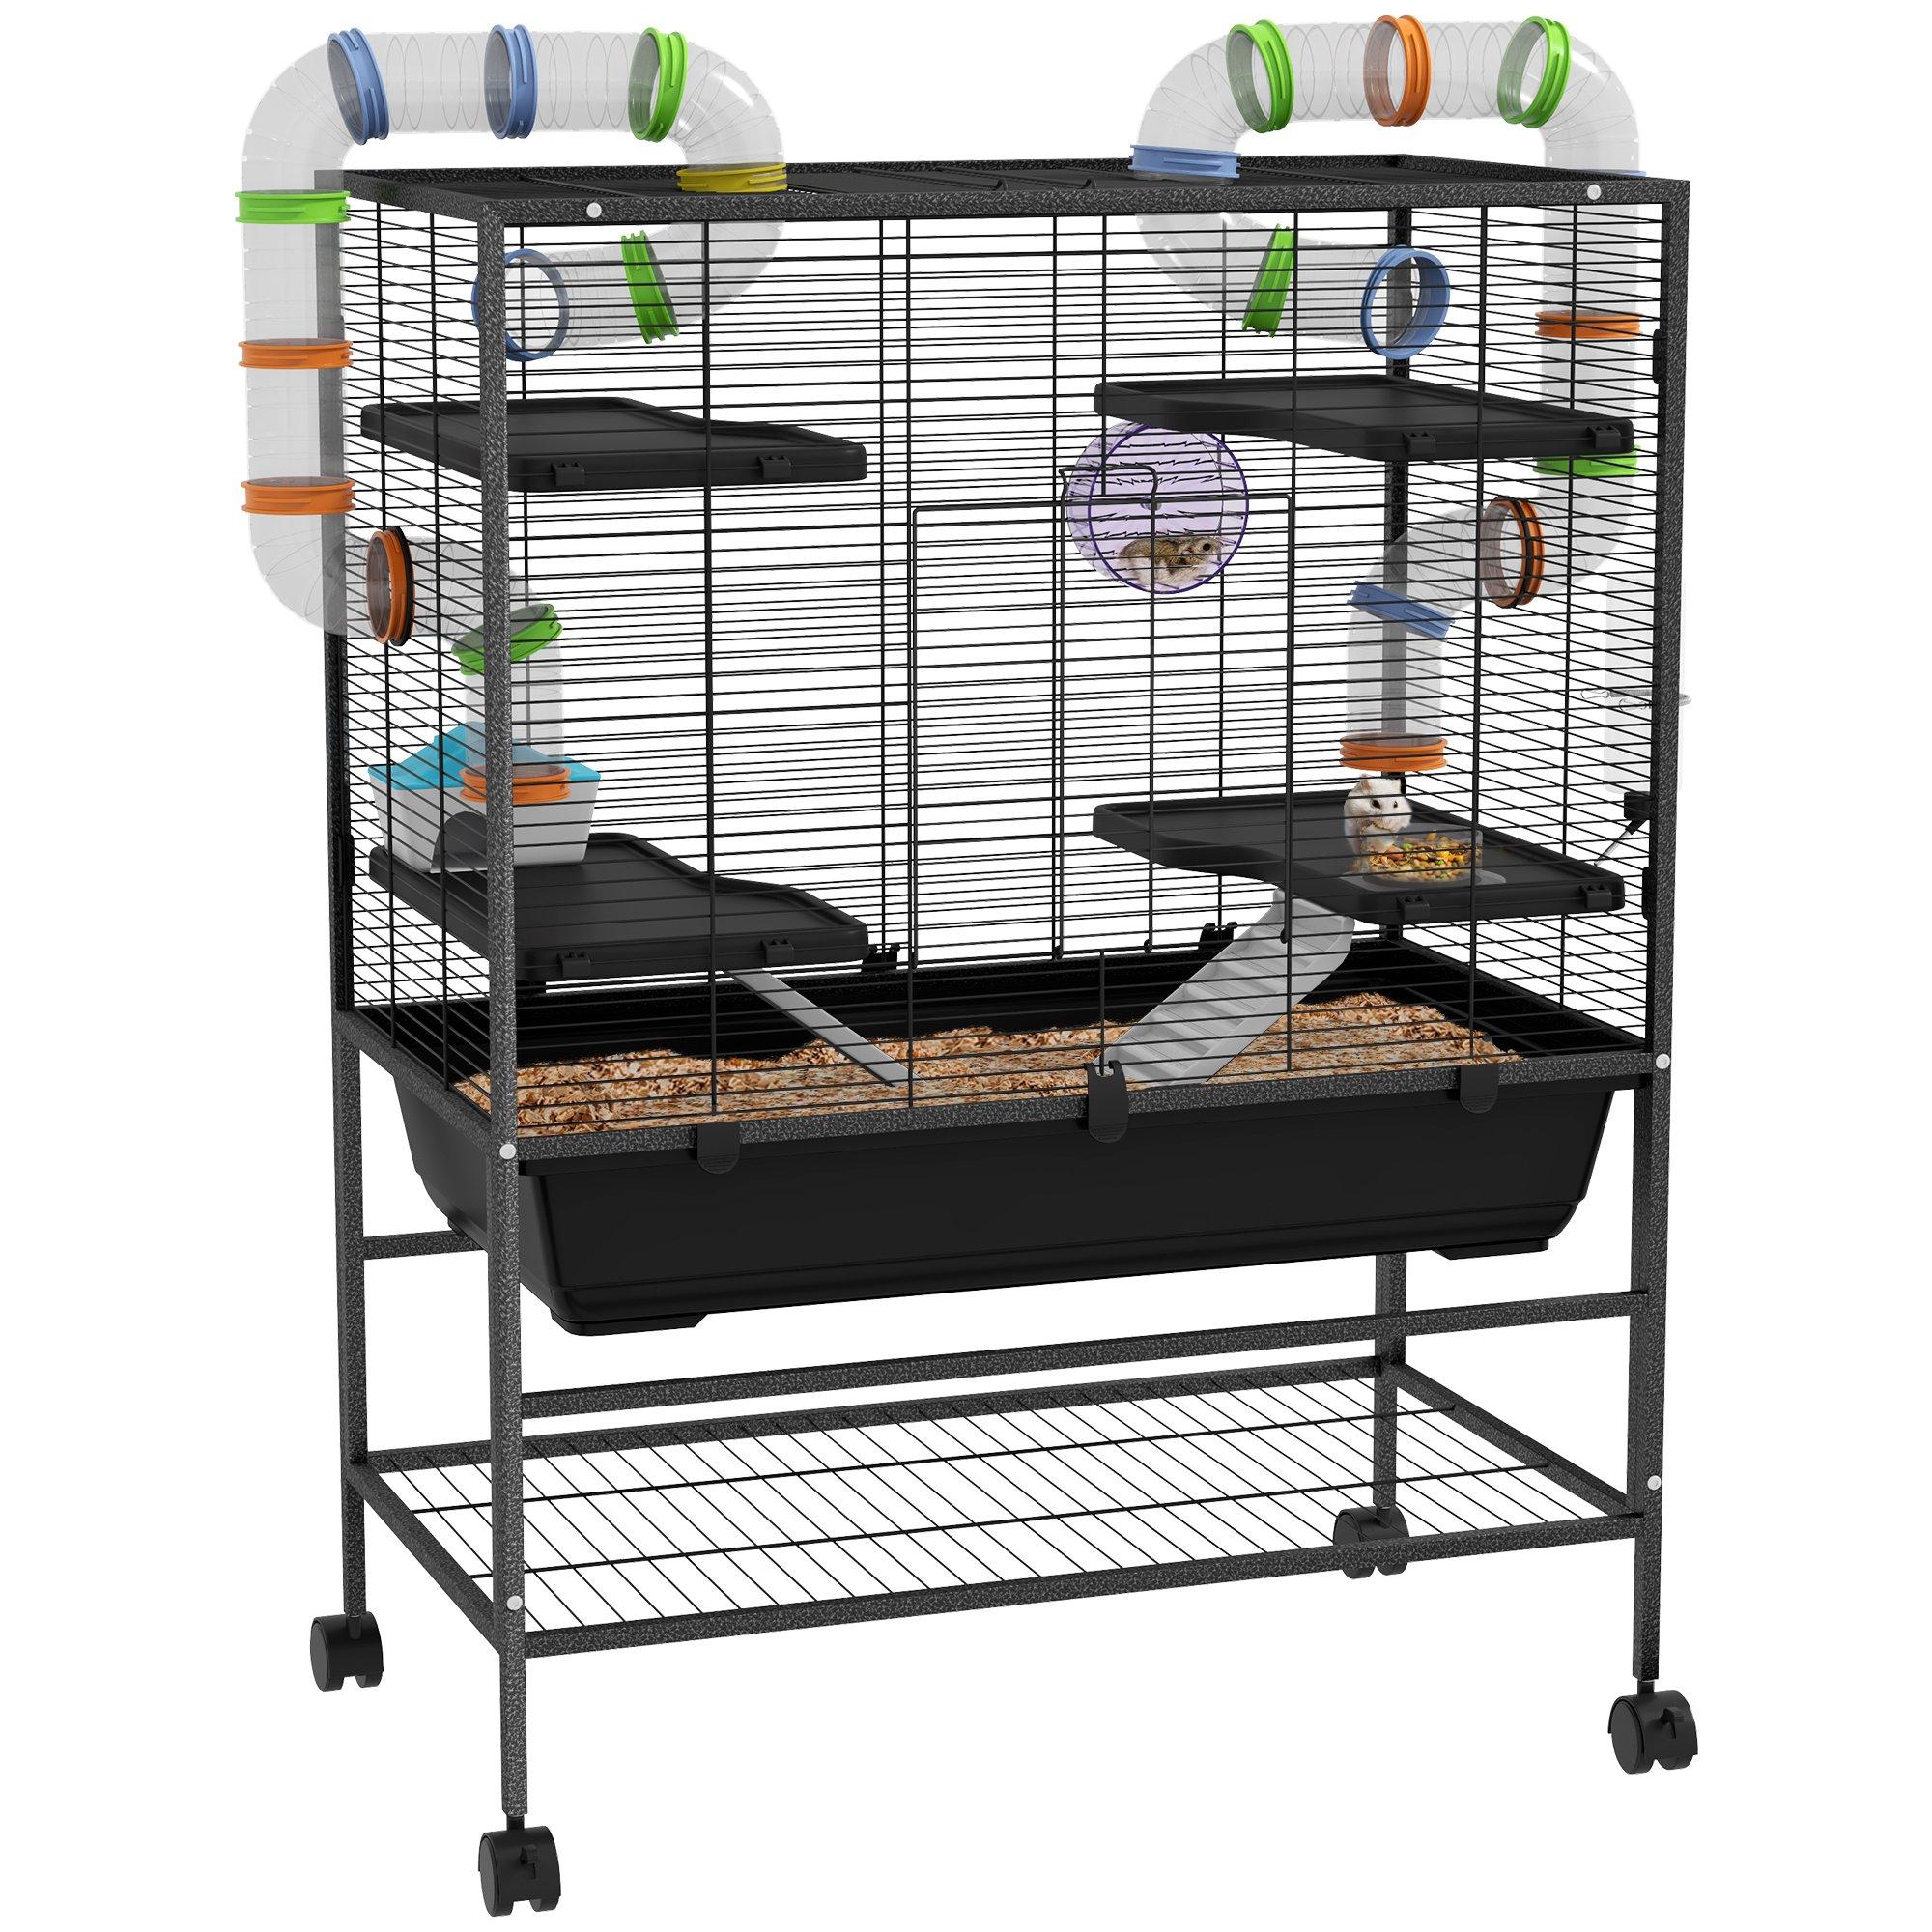 Large Hamster Cage, Rat Cage with Wheels, Storage Shelf, Food Dish, Water Bottle